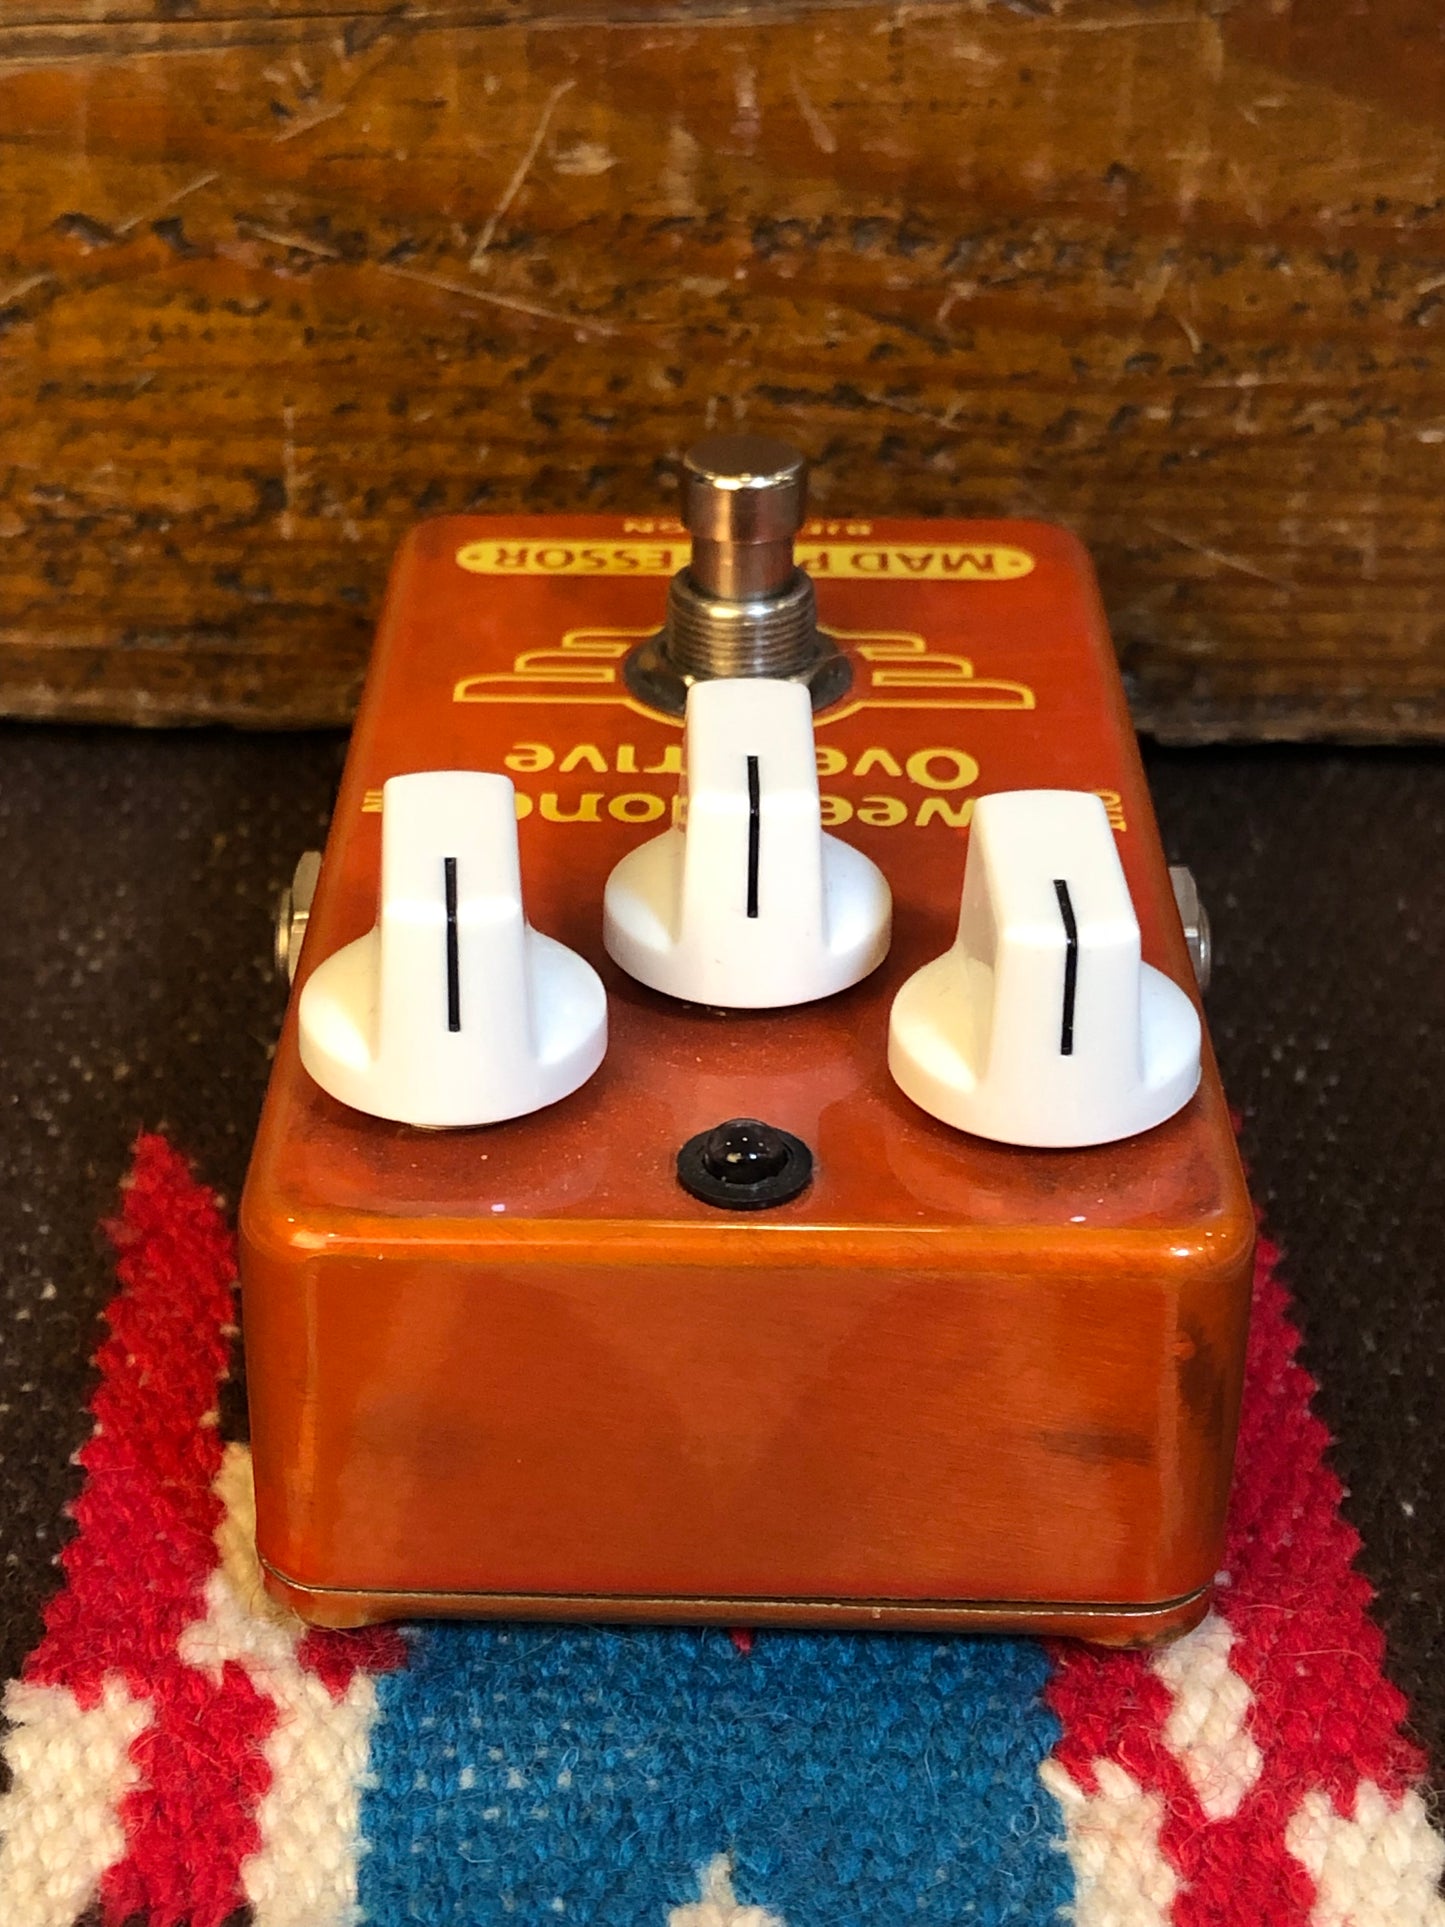 Mad Professor Hand Wired Sweet Honey Overdrive